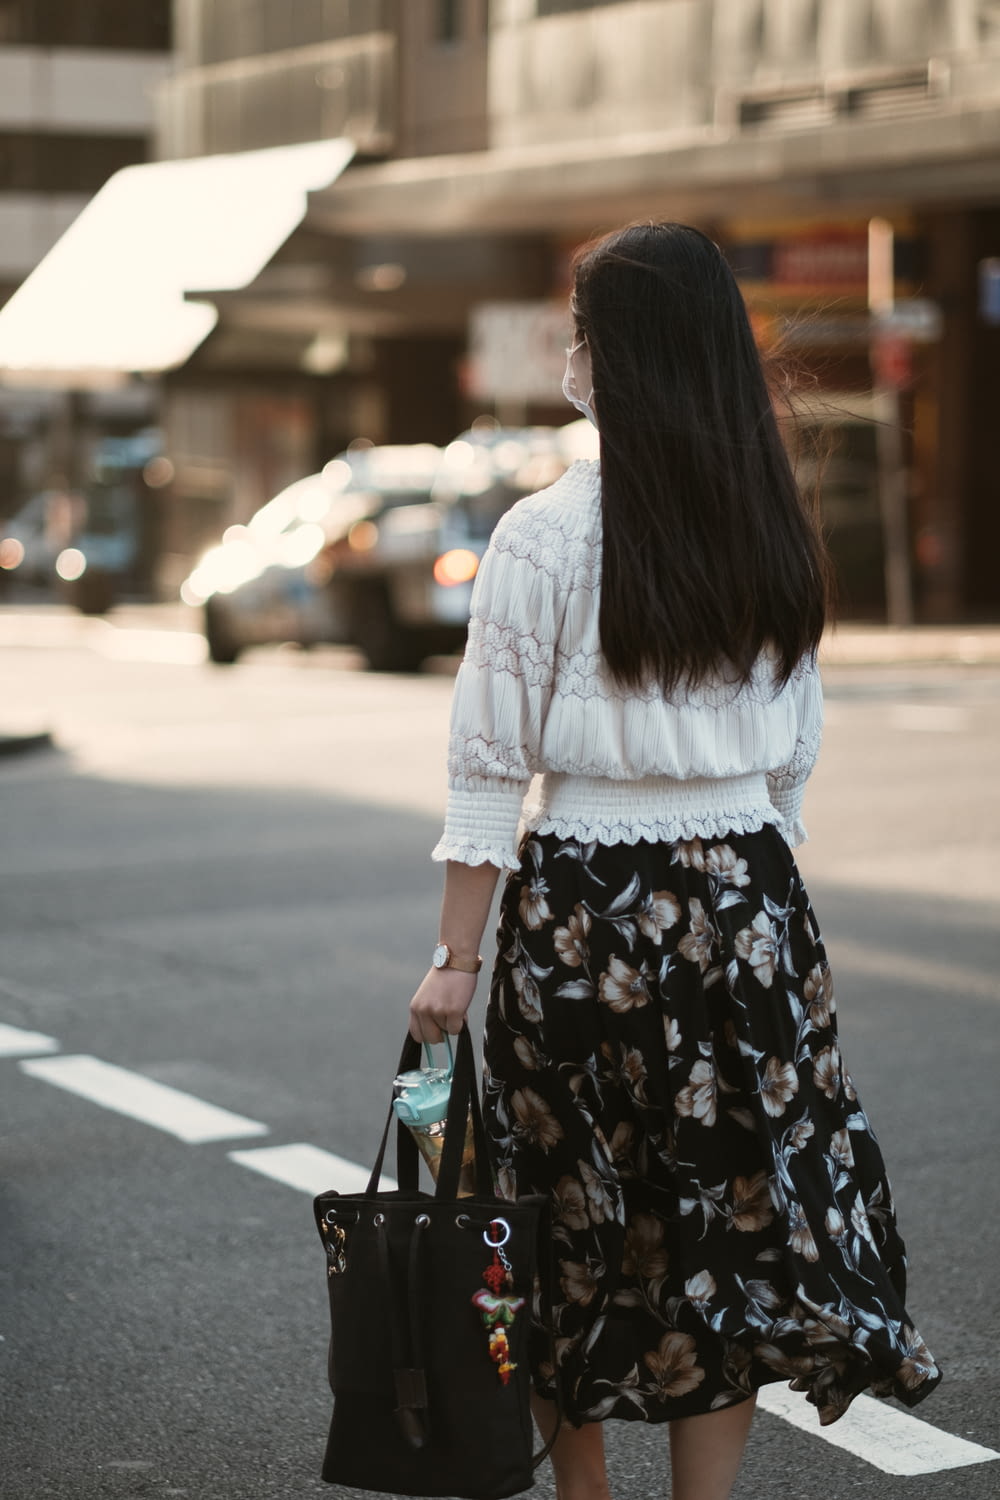 woman in white long sleeve shirt and black floral skirt standing on sidewalk during daytime